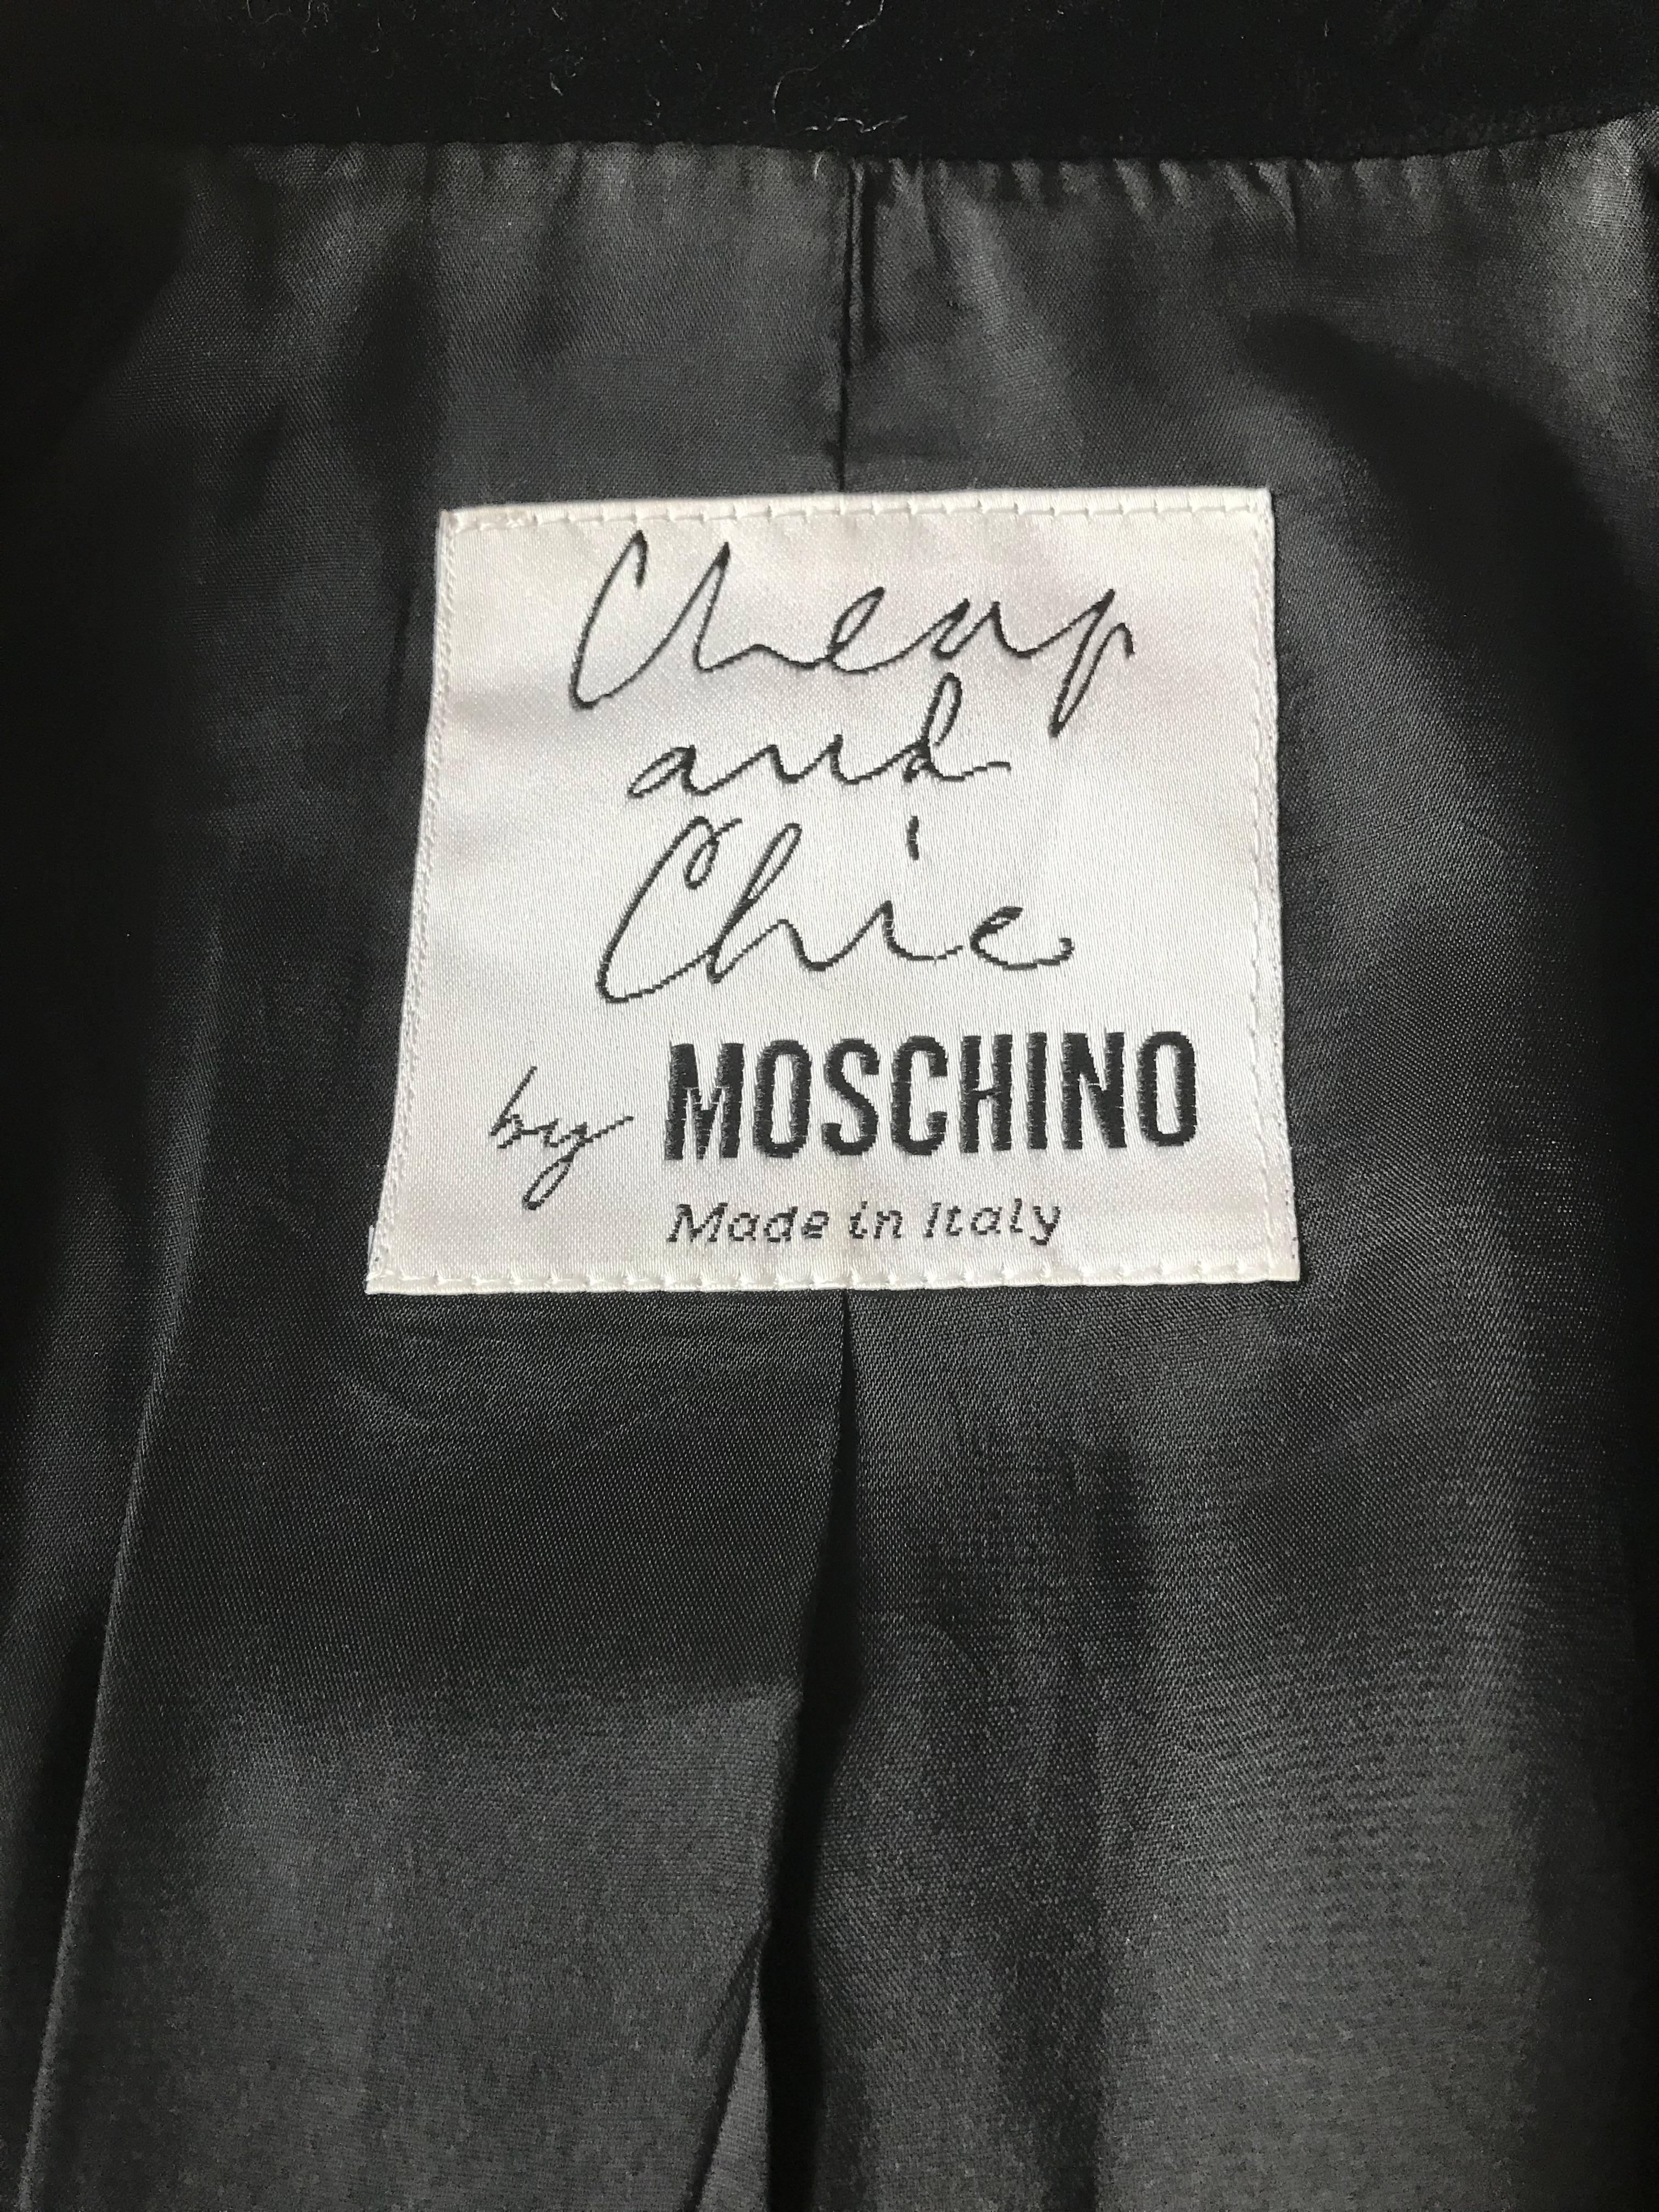 Moschino Cheap & Chic 1990s Black Question Mark Jacket and Skirt Suit In Good Condition For Sale In San Francisco, CA